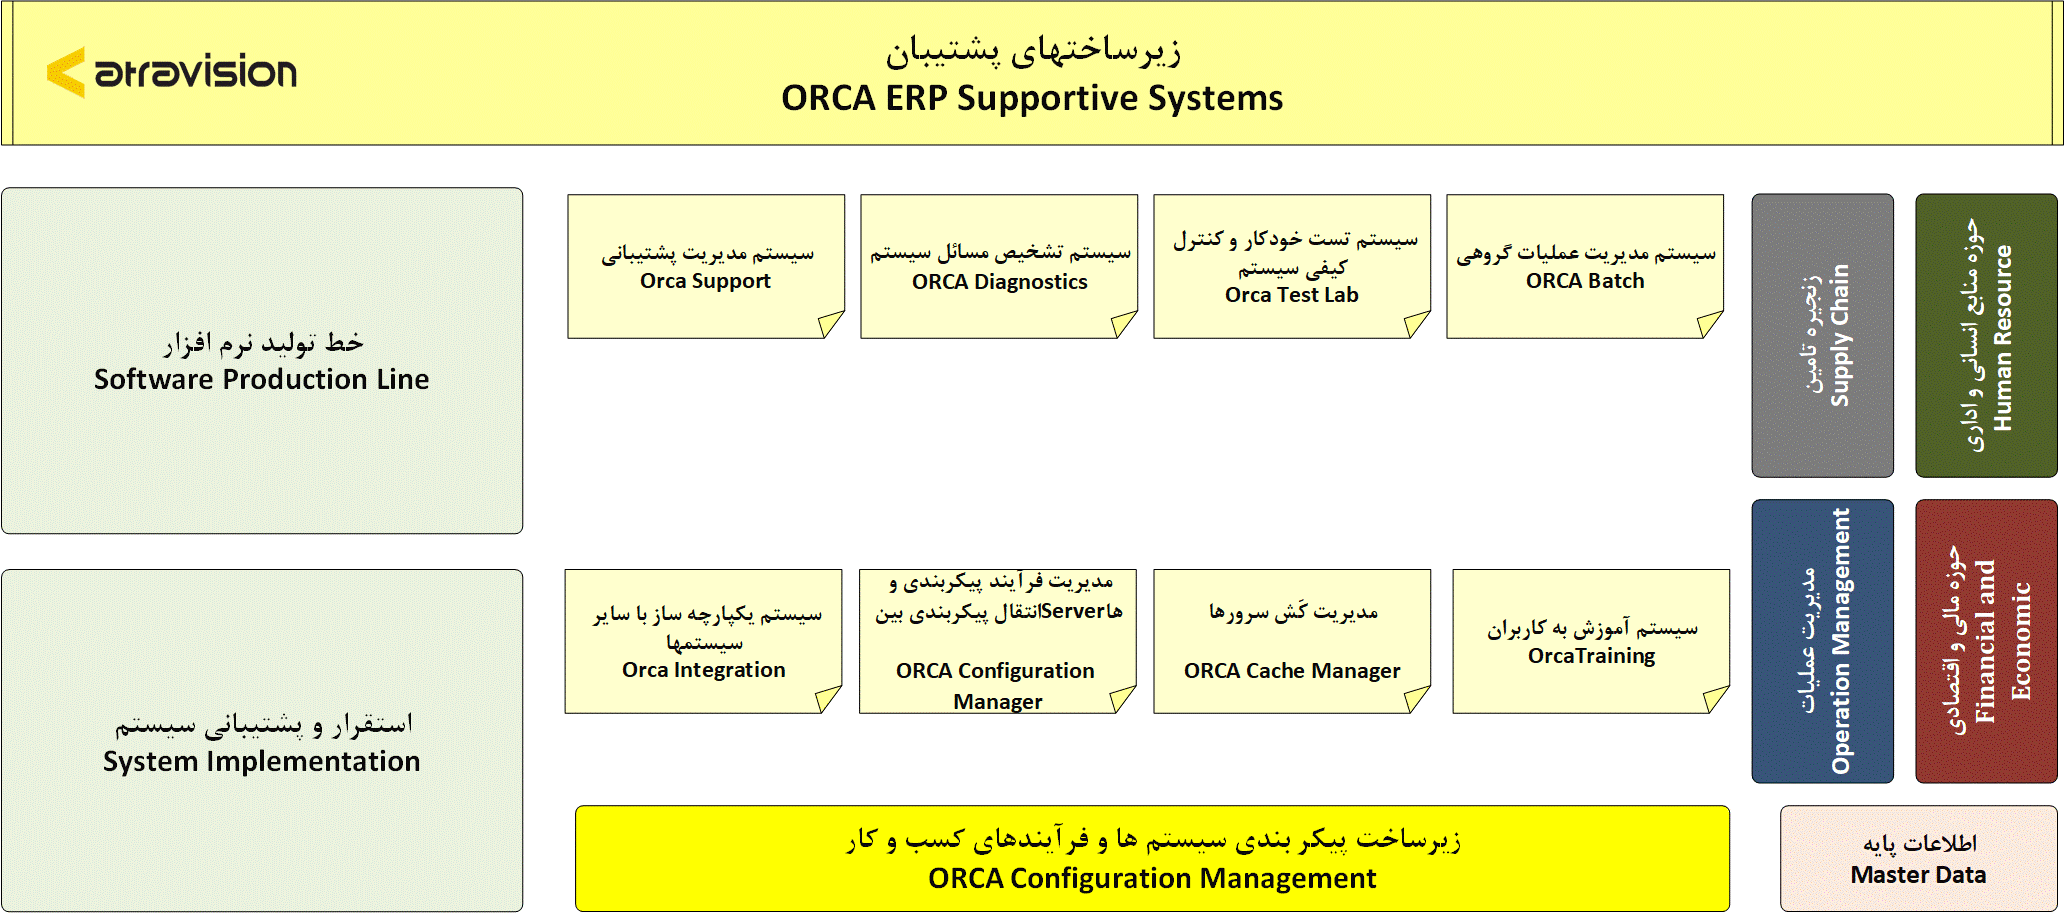 ٍORCA-ERP-Production-Line-Supportive-Systems-Diagram